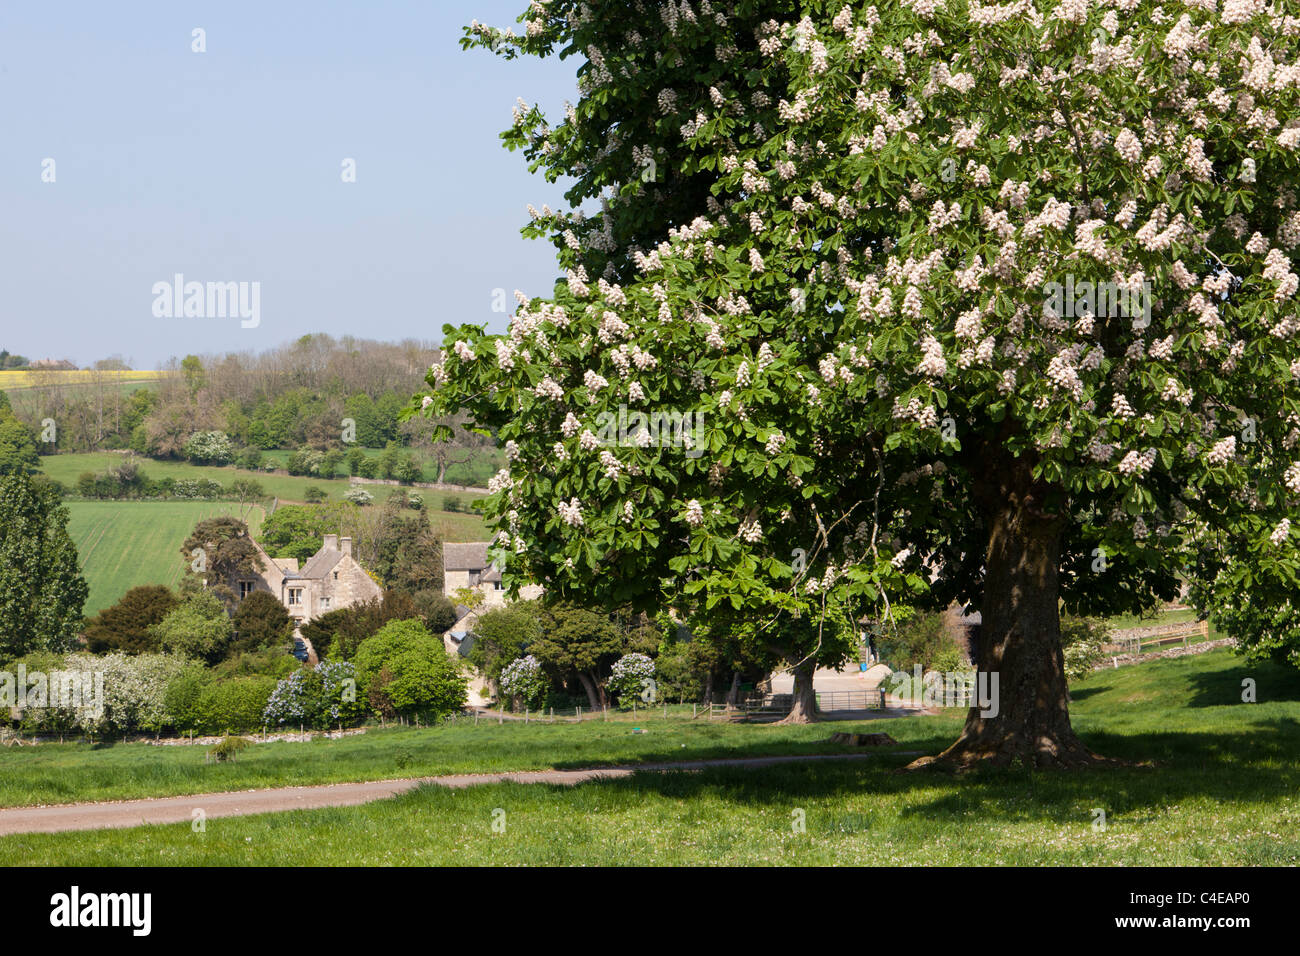 A horse chestnut tree in full blossom in the Cotswold hamlet of Hampen, Gloucestershire, England UK Stock Photo